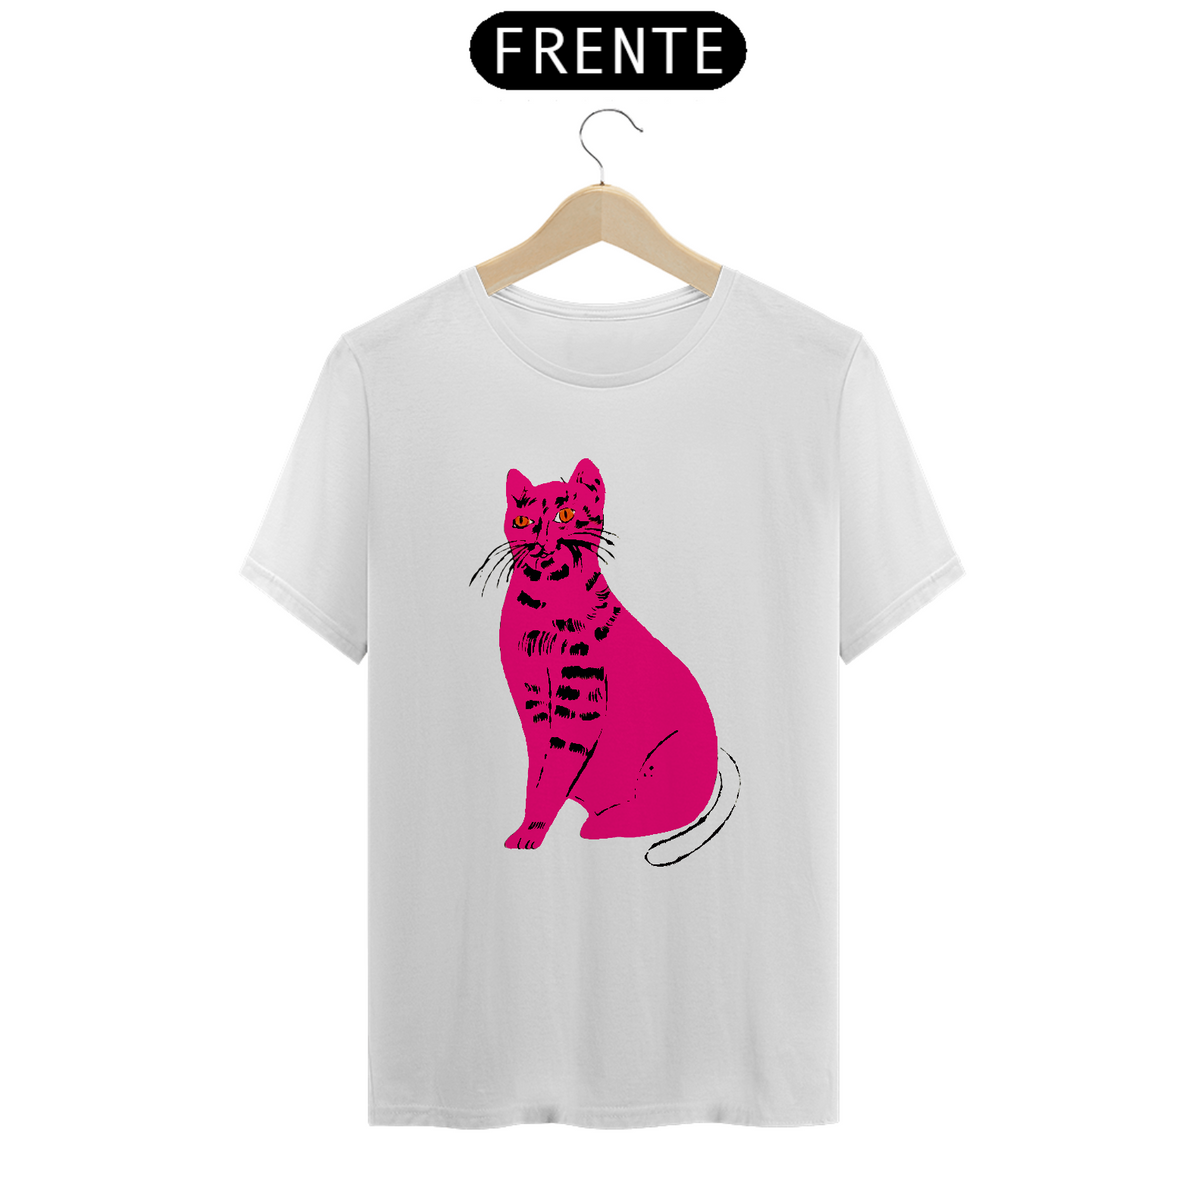 Nome do produto: Andy Warhol Pink Cat Prime